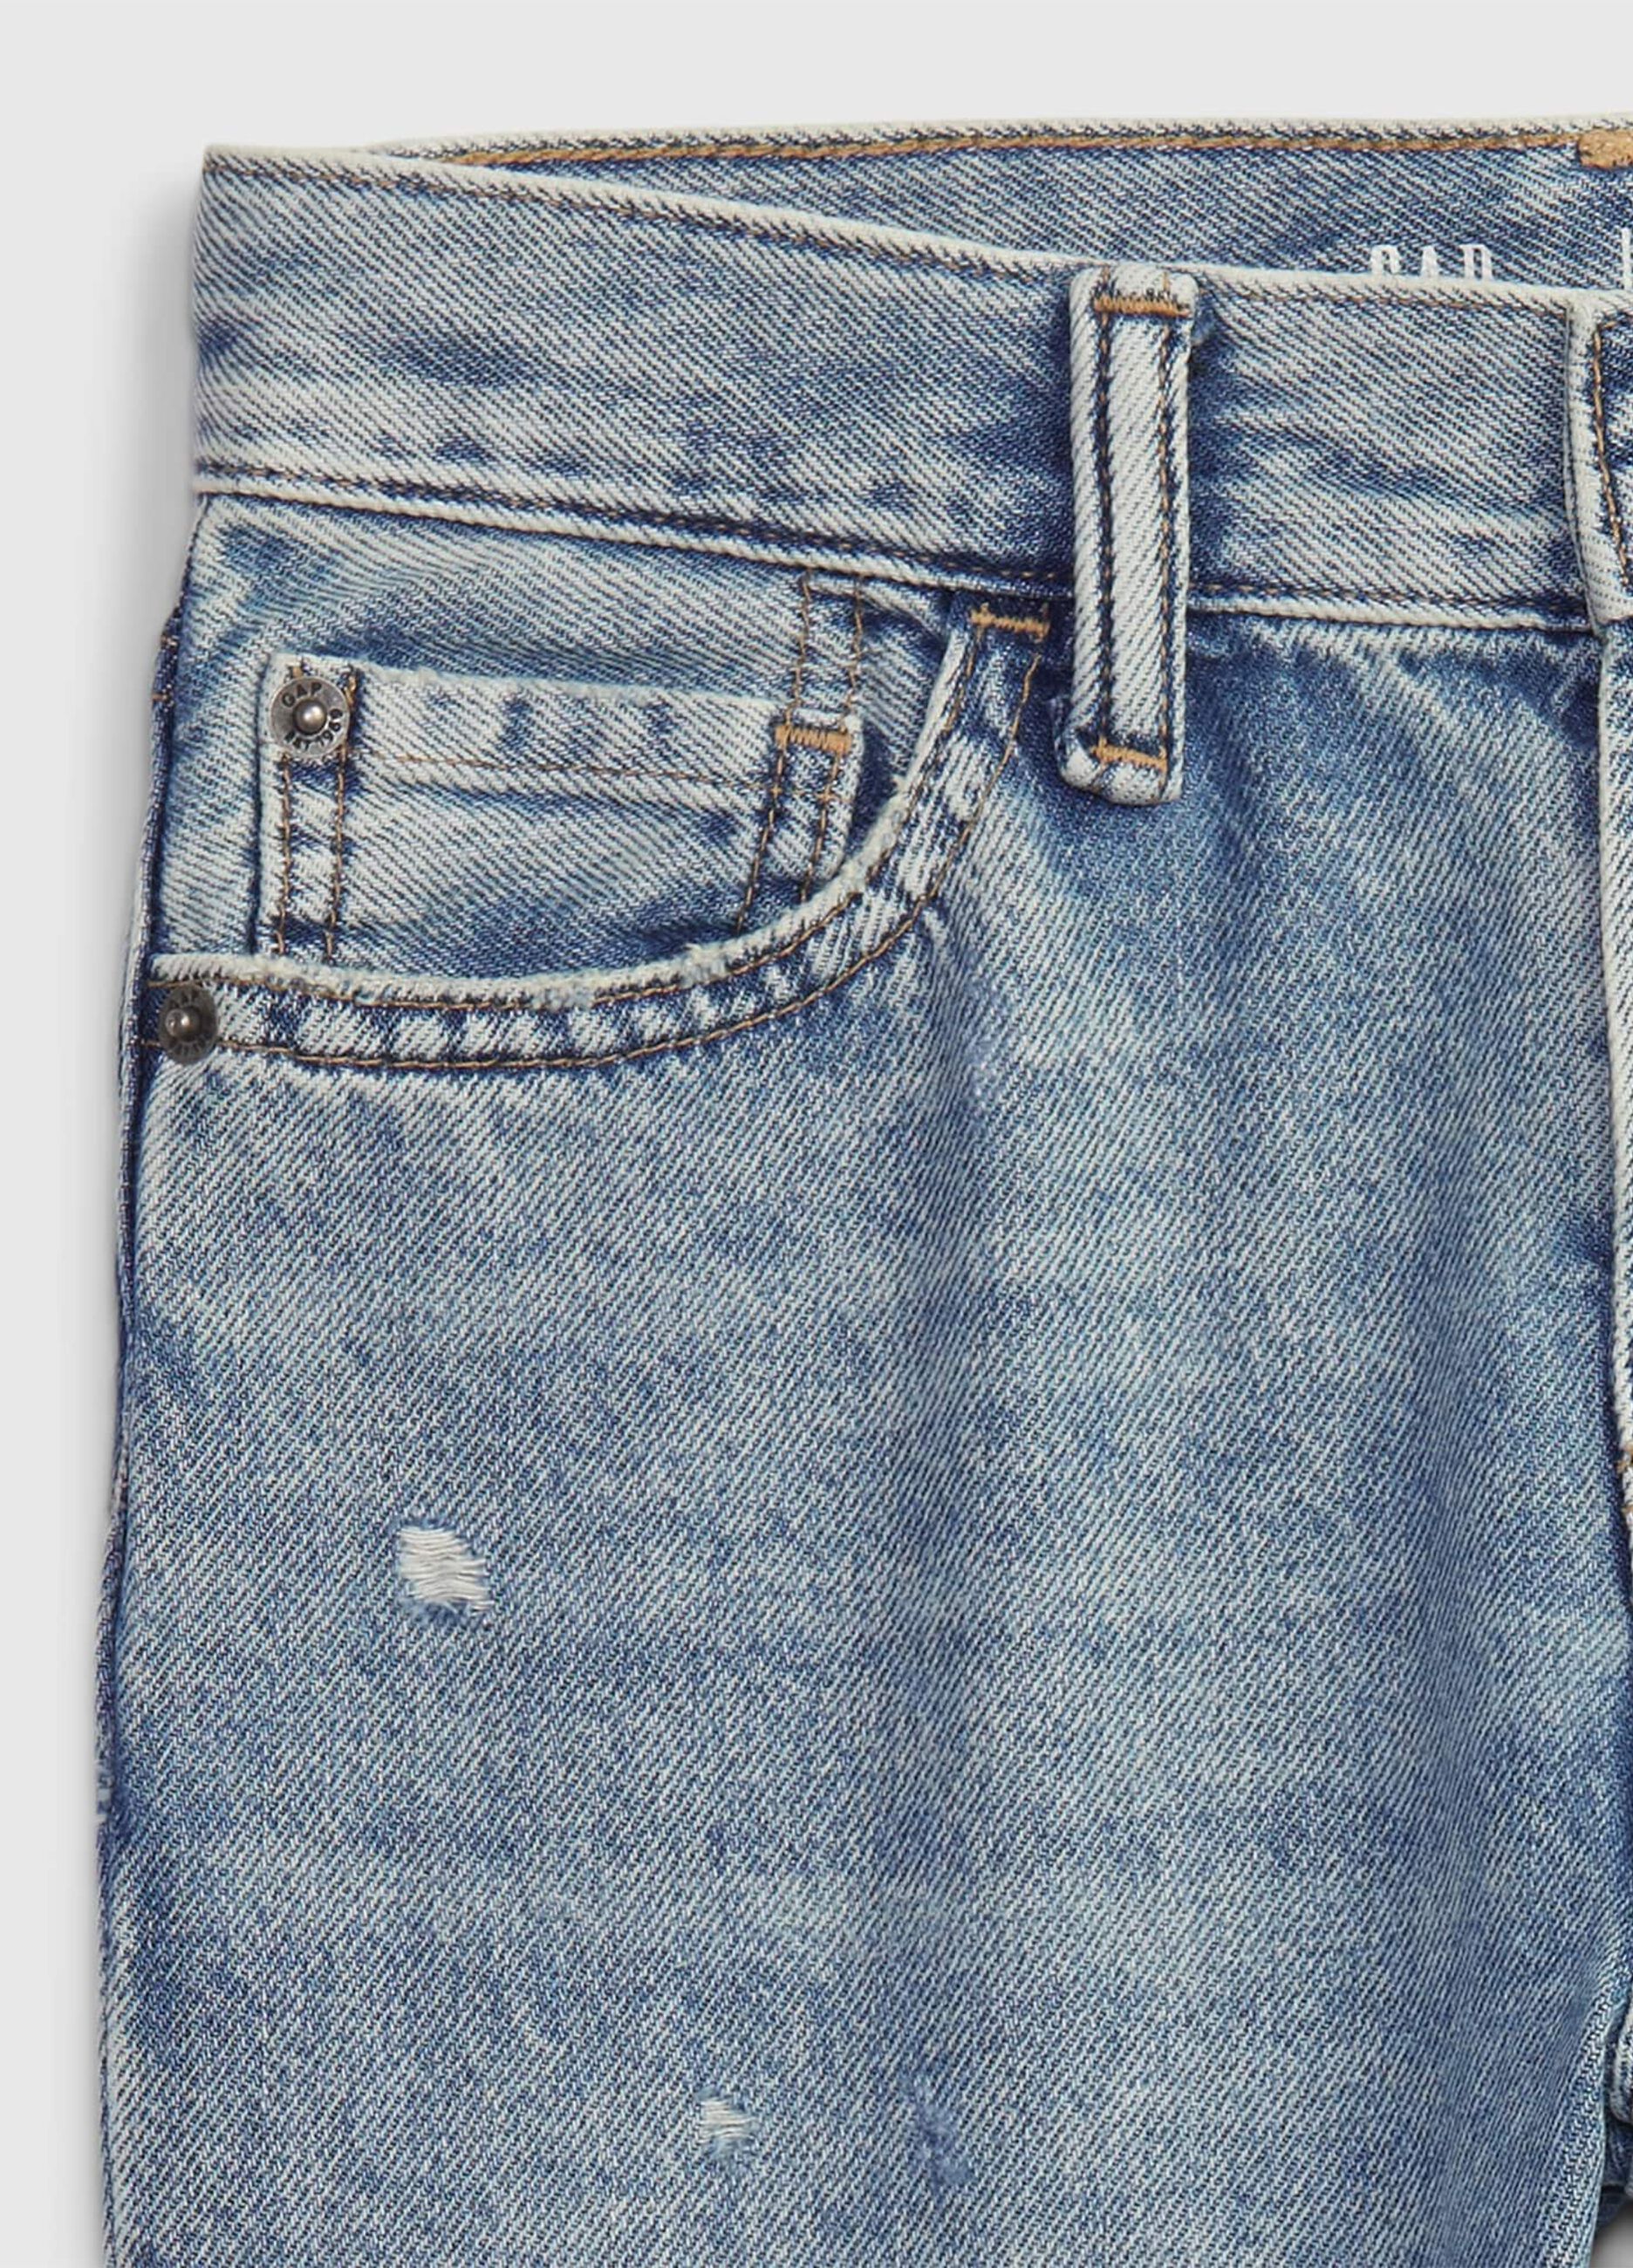 Five-pocket jeans with abrasions